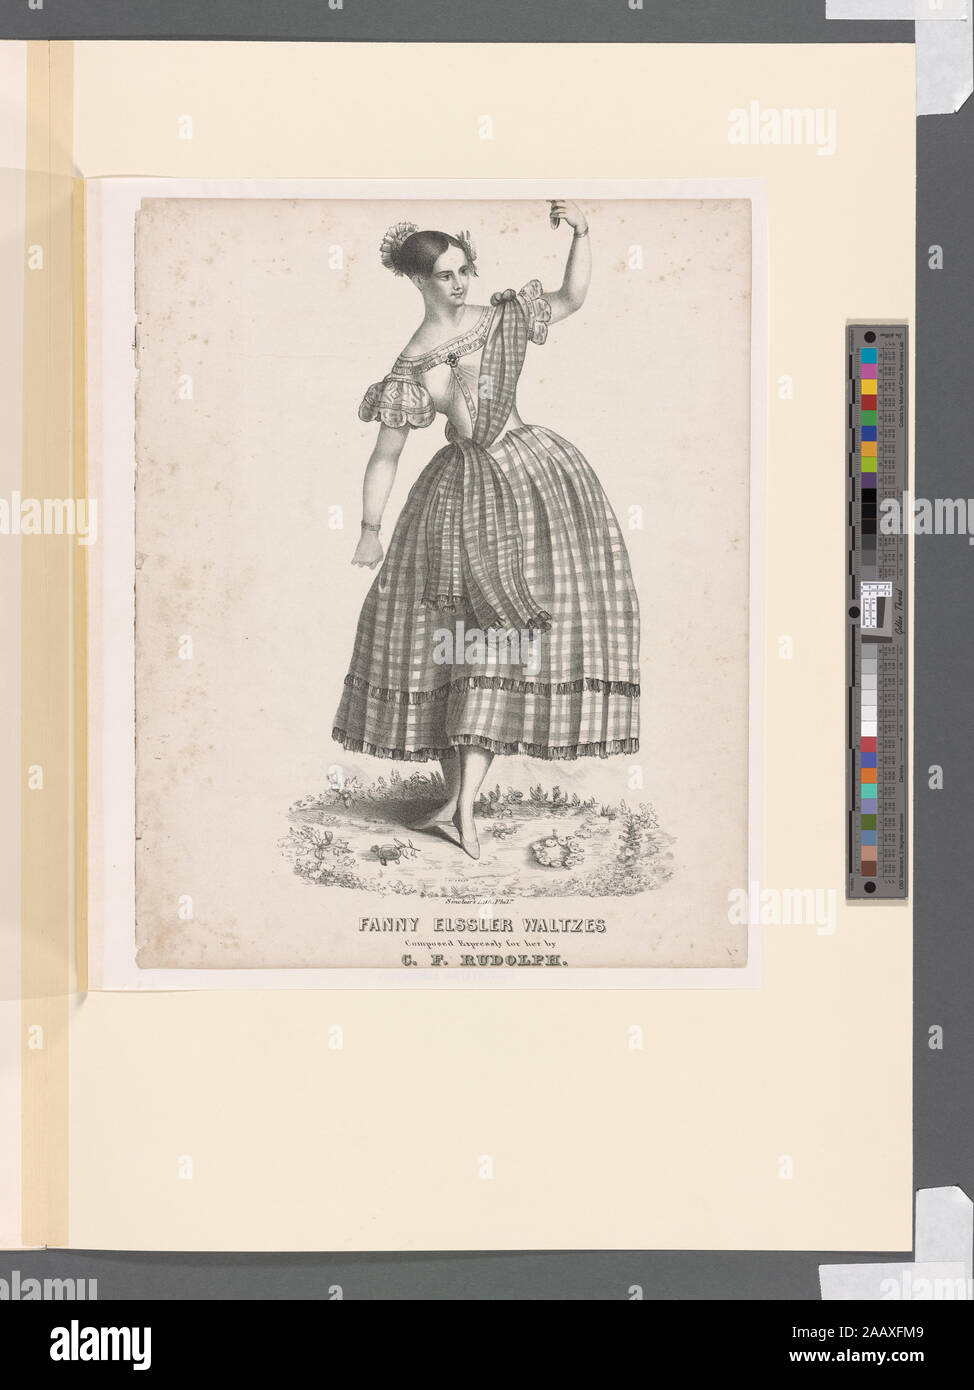 Fanny Elssler waltzes composed expressly for her by C F Rudolph Sheet music cover: Elssler slightly to left, looking right, left foot forward, left arm curved at shoulder level, holding castanets; wearing the cachucha costume turned into a plaid gown with a stole fastened at left shoulder and crossed to right hip.; Fanny Elssler waltzes composed expressly for her by C. F. Rudolph. Stock Photo